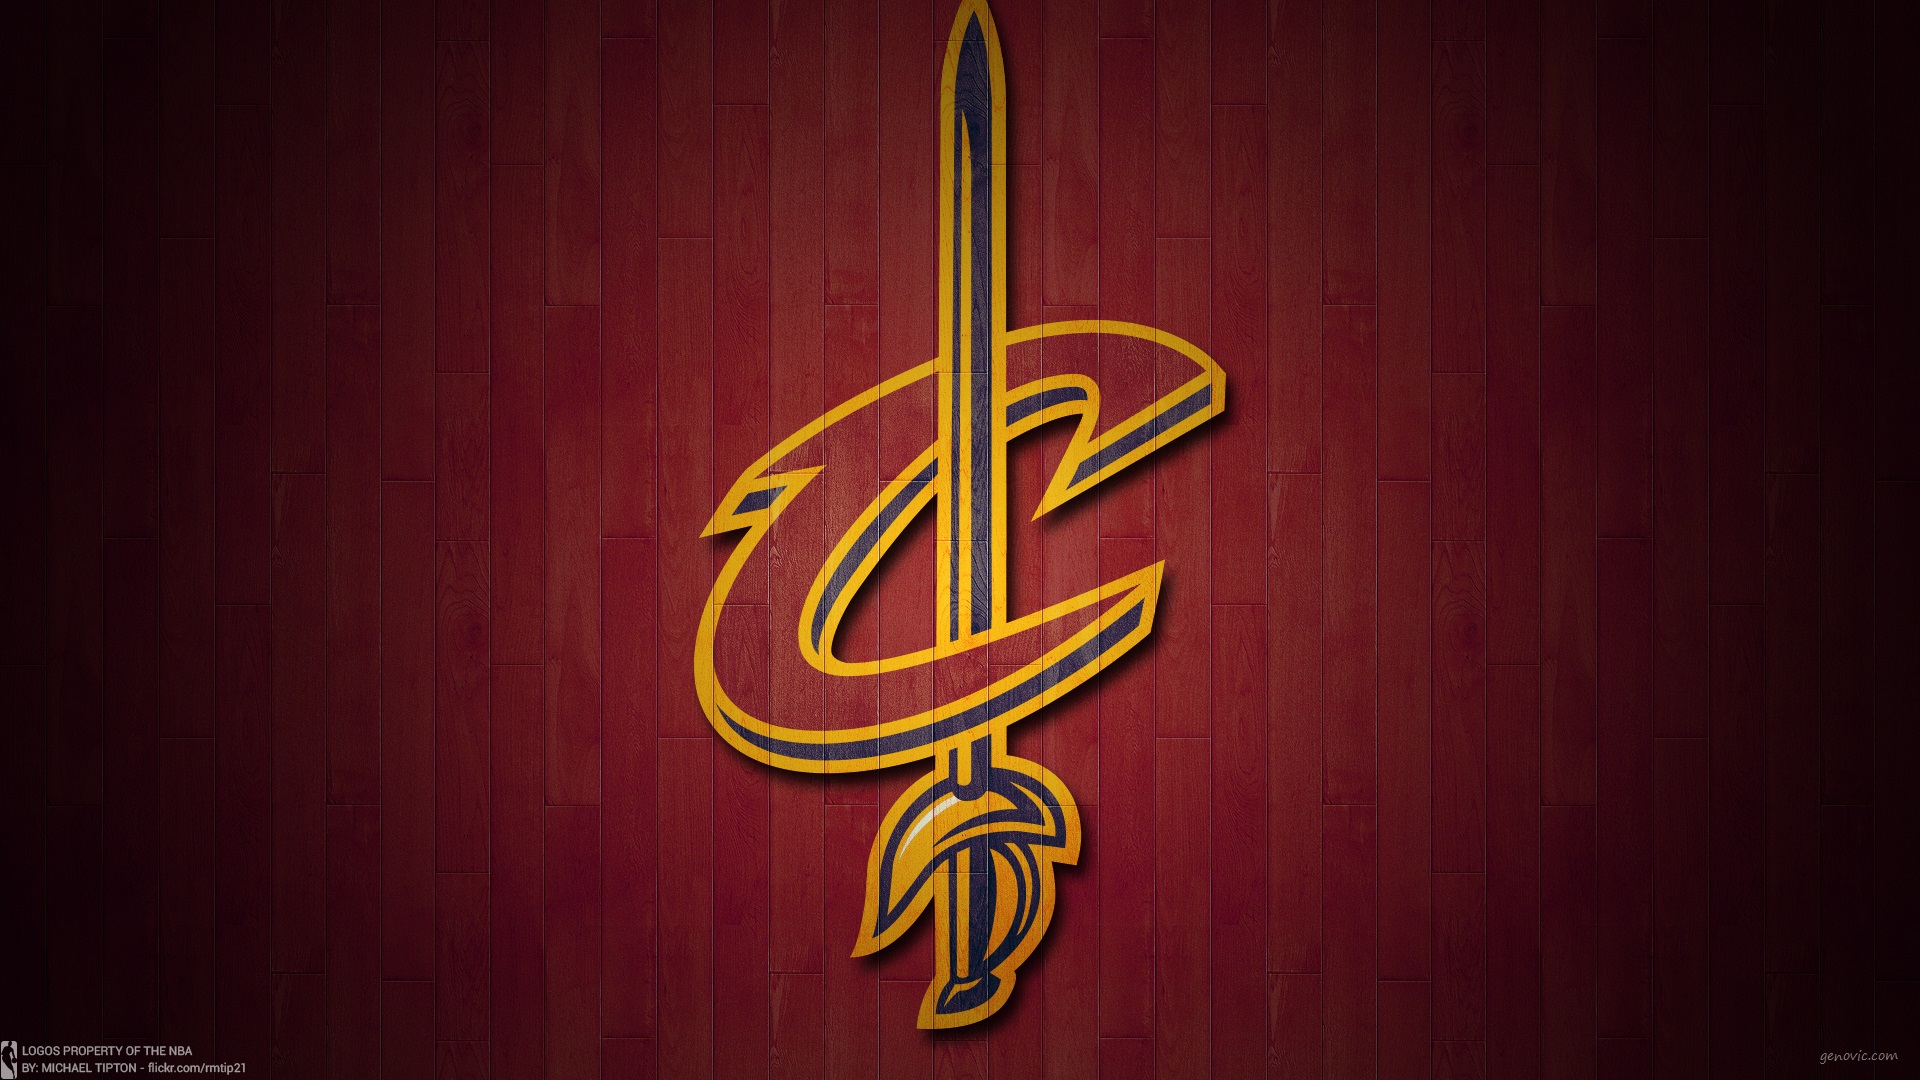 Cleveland Cavaliers HD Wallpaper Background Image